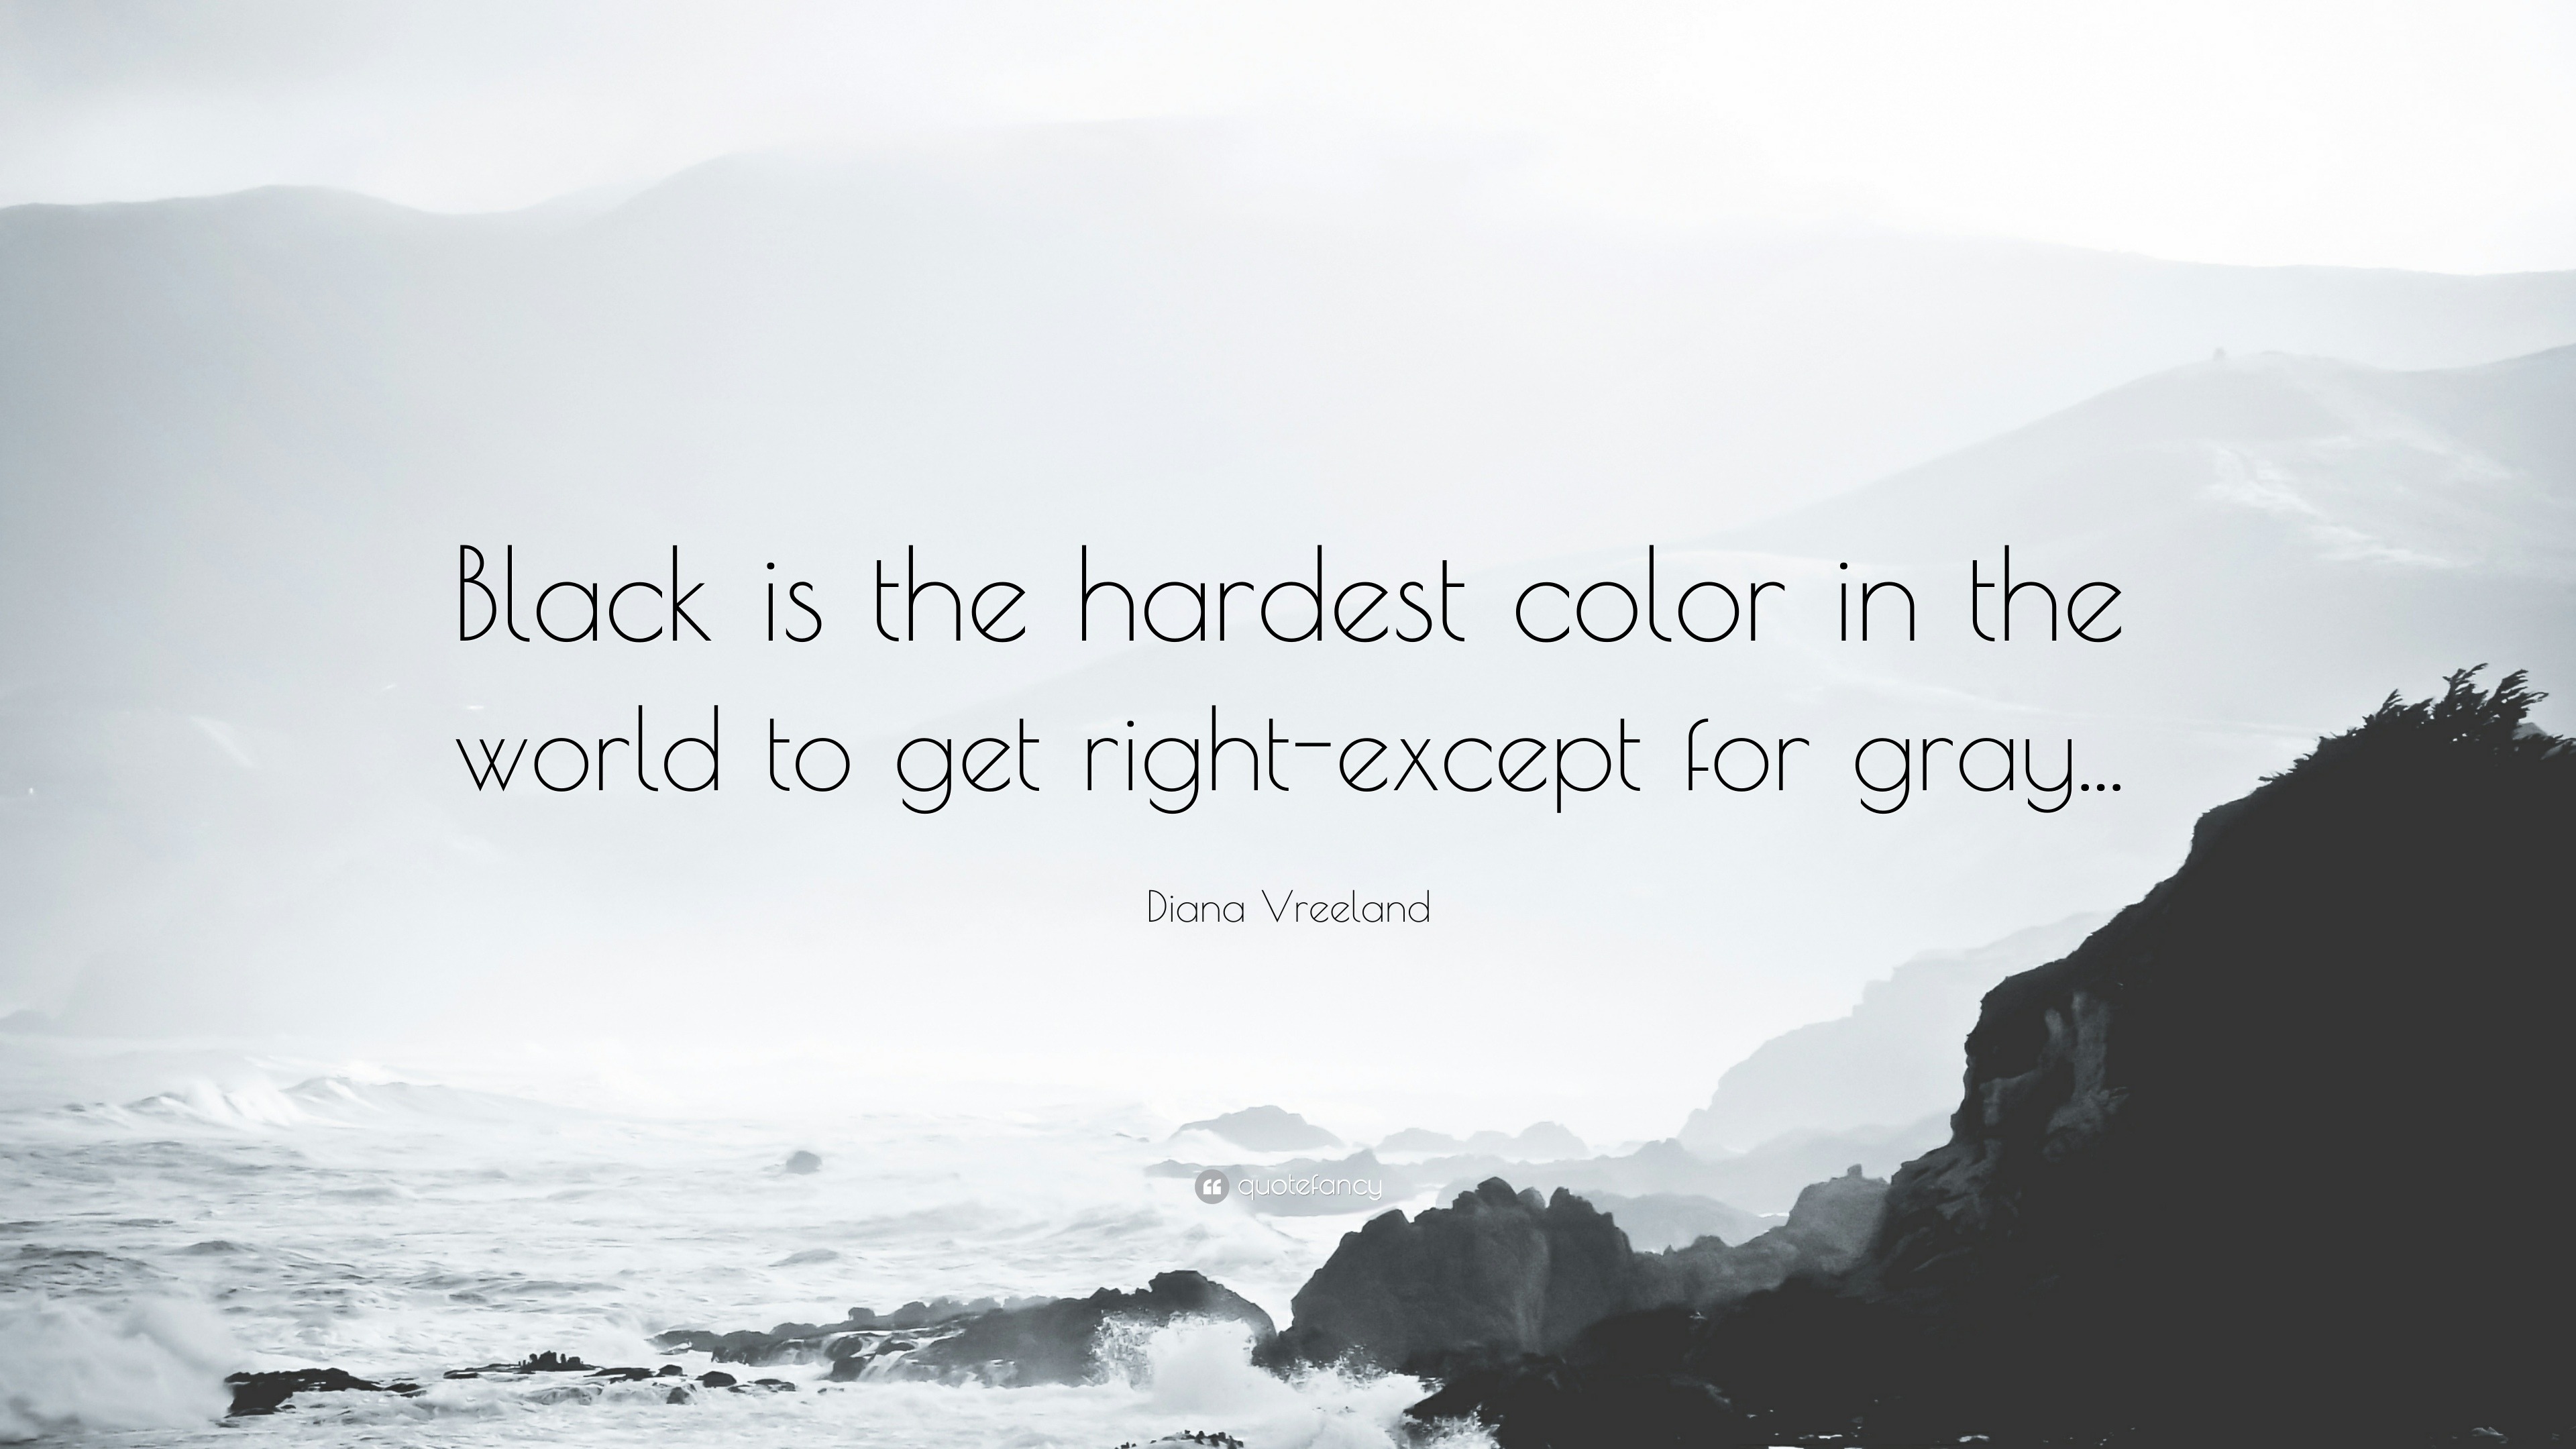 Diana Vreeland Quote: “Black is the hardest color in the world to get right- except for